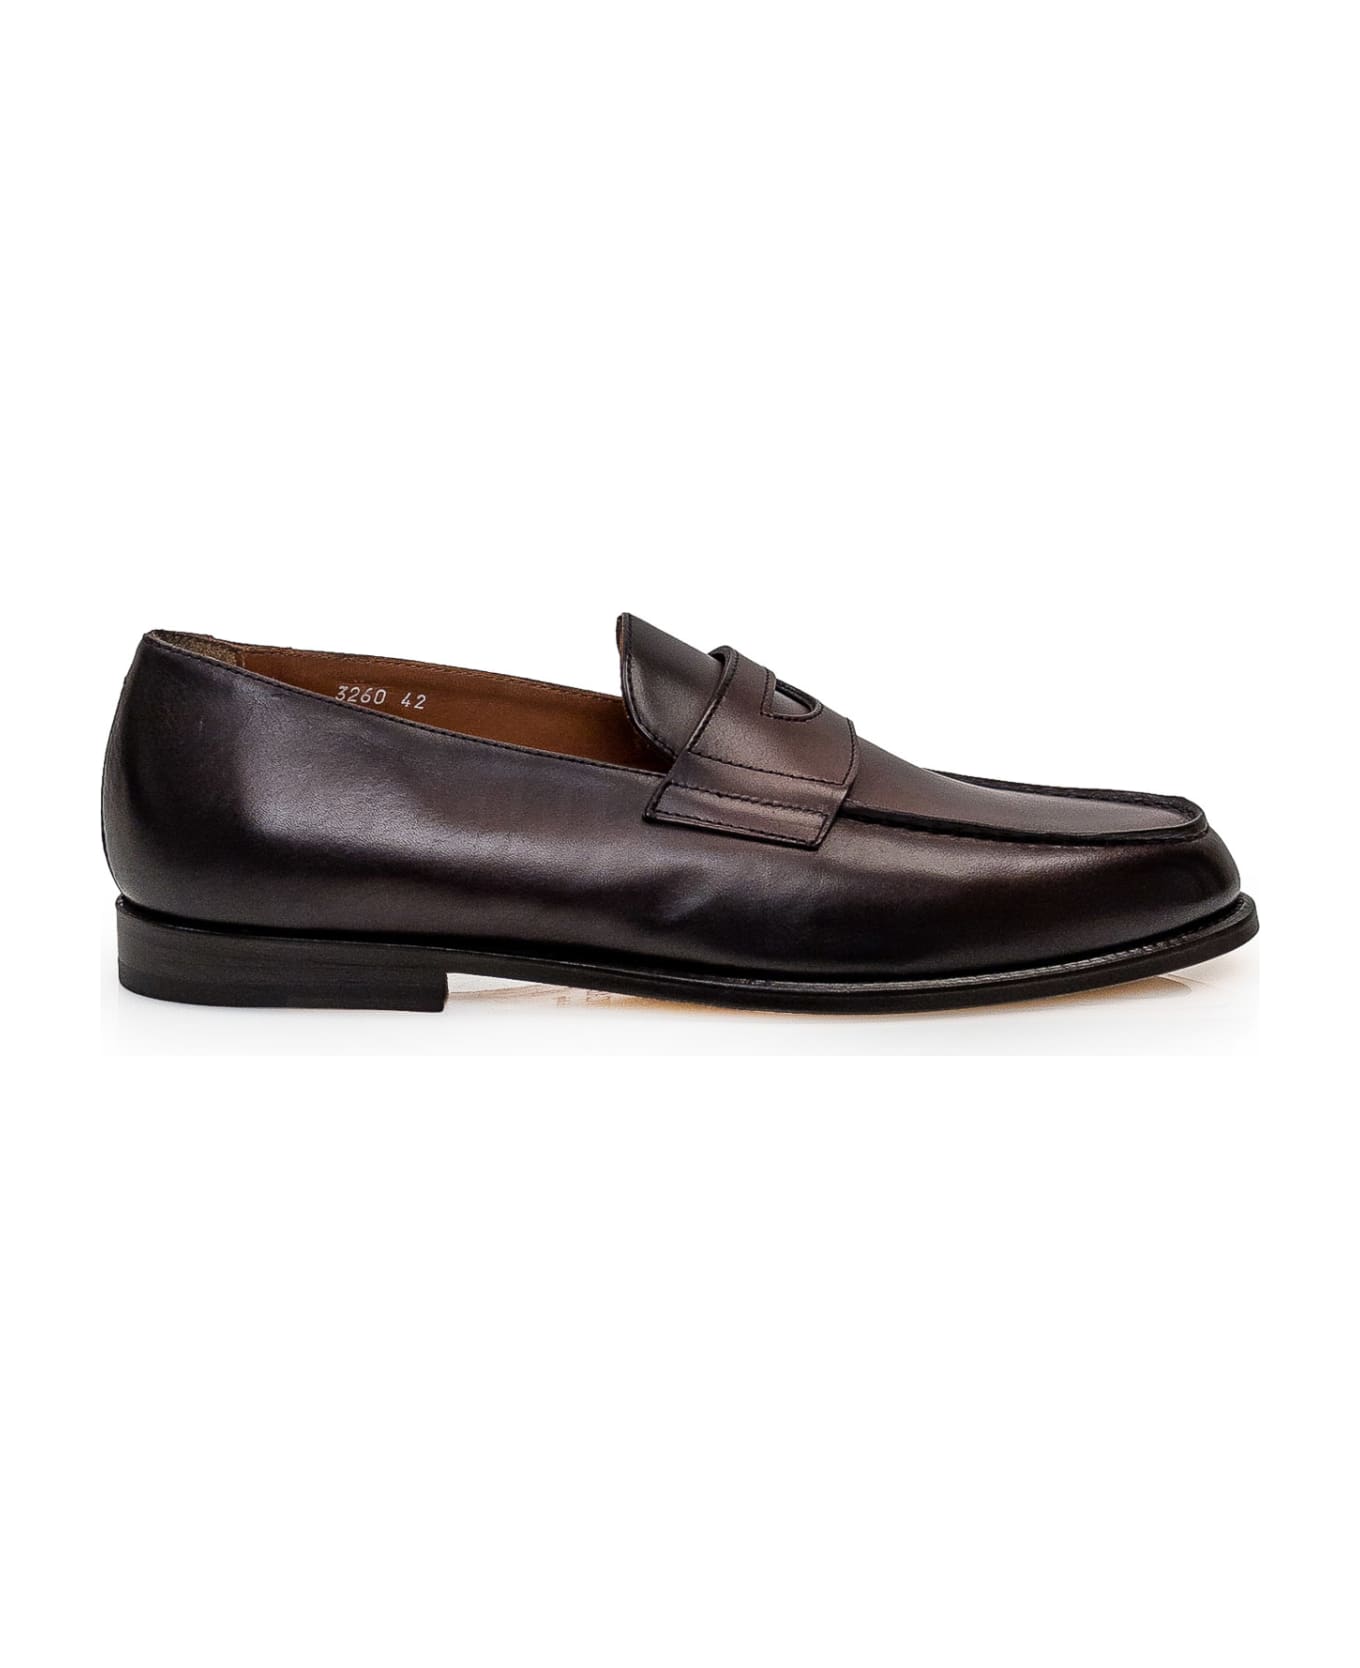 Doucal's Leather Loafer - T MORO SCURO-FDO T.MORO